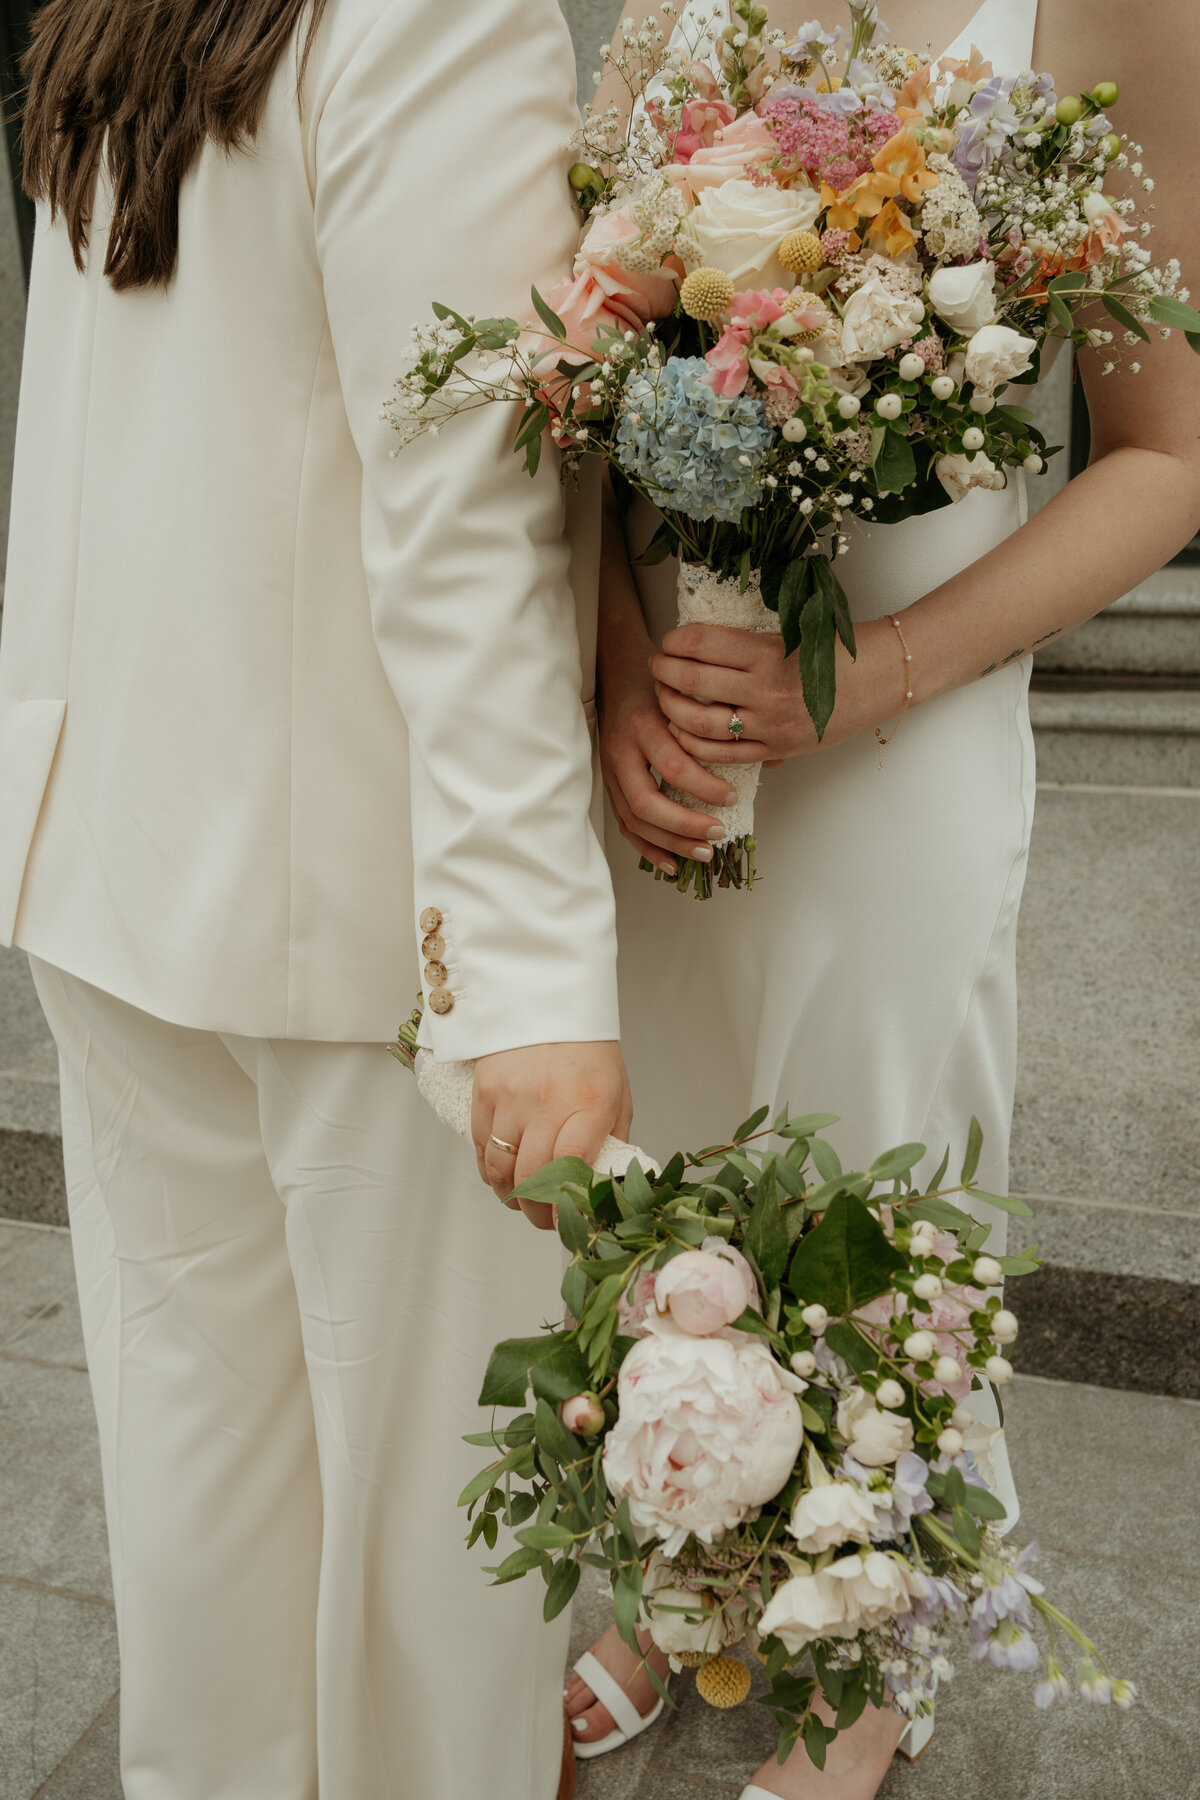 Close-up photo of a wedding couple holding bouquets. Both individuals are dressed in white; one wears a suit while the other wears a dress. The bouquets are filled with a variety of flowers, including peonies, roses, and hydrangeas, showcasing soft pastel colors. The image captures the elegant simplicity of their attire and the beauty of the floral arrangements against a stone staircase backdrop.